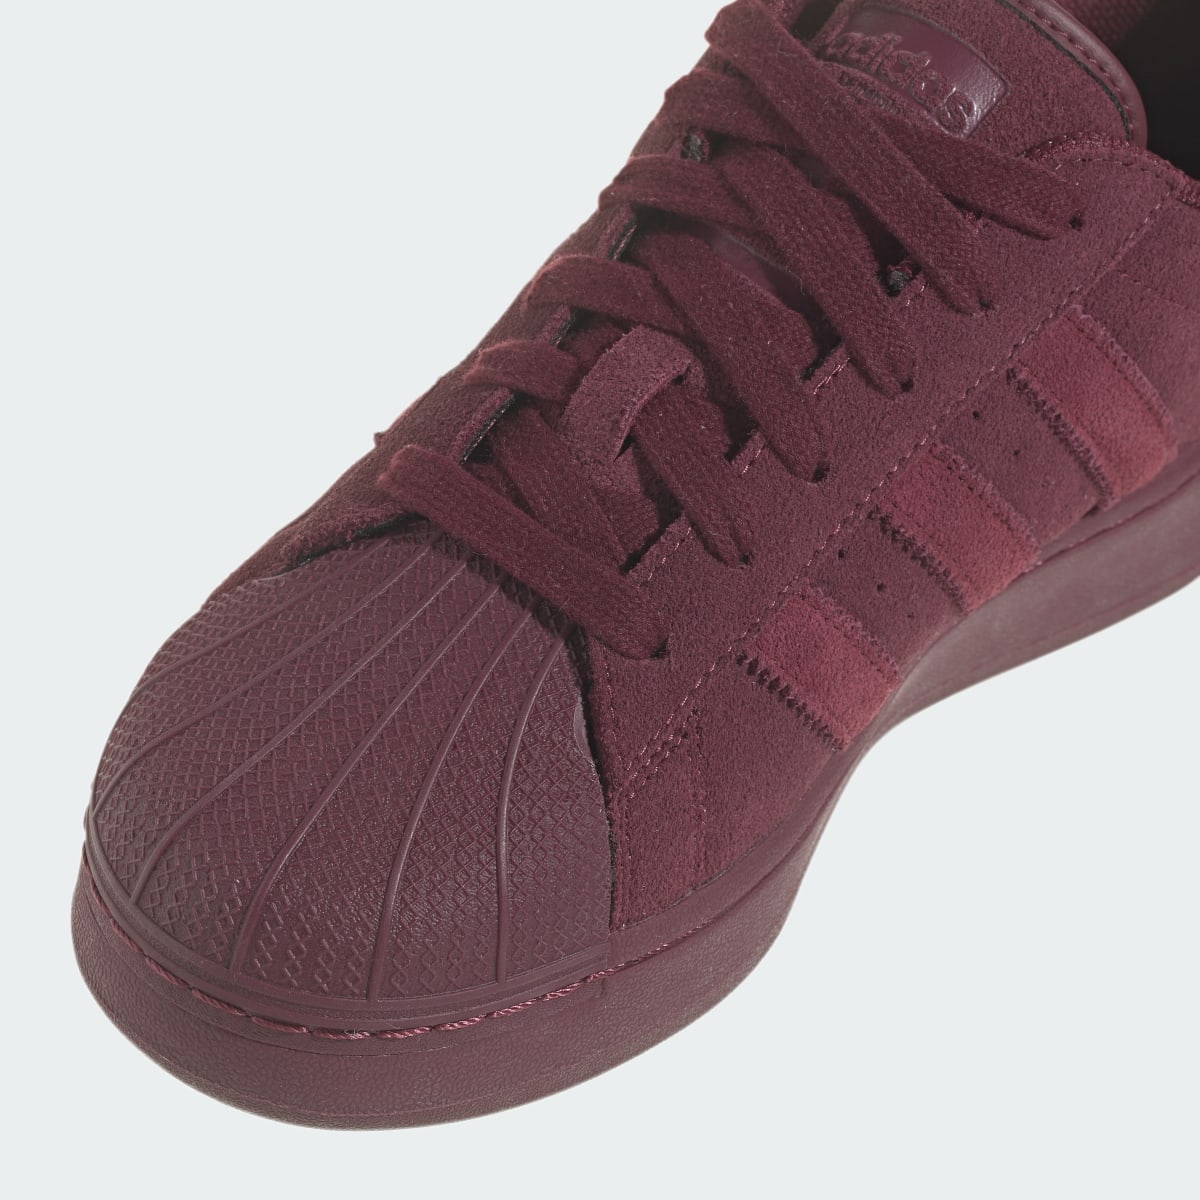 Adidas Superstar XLG Shoes. 12